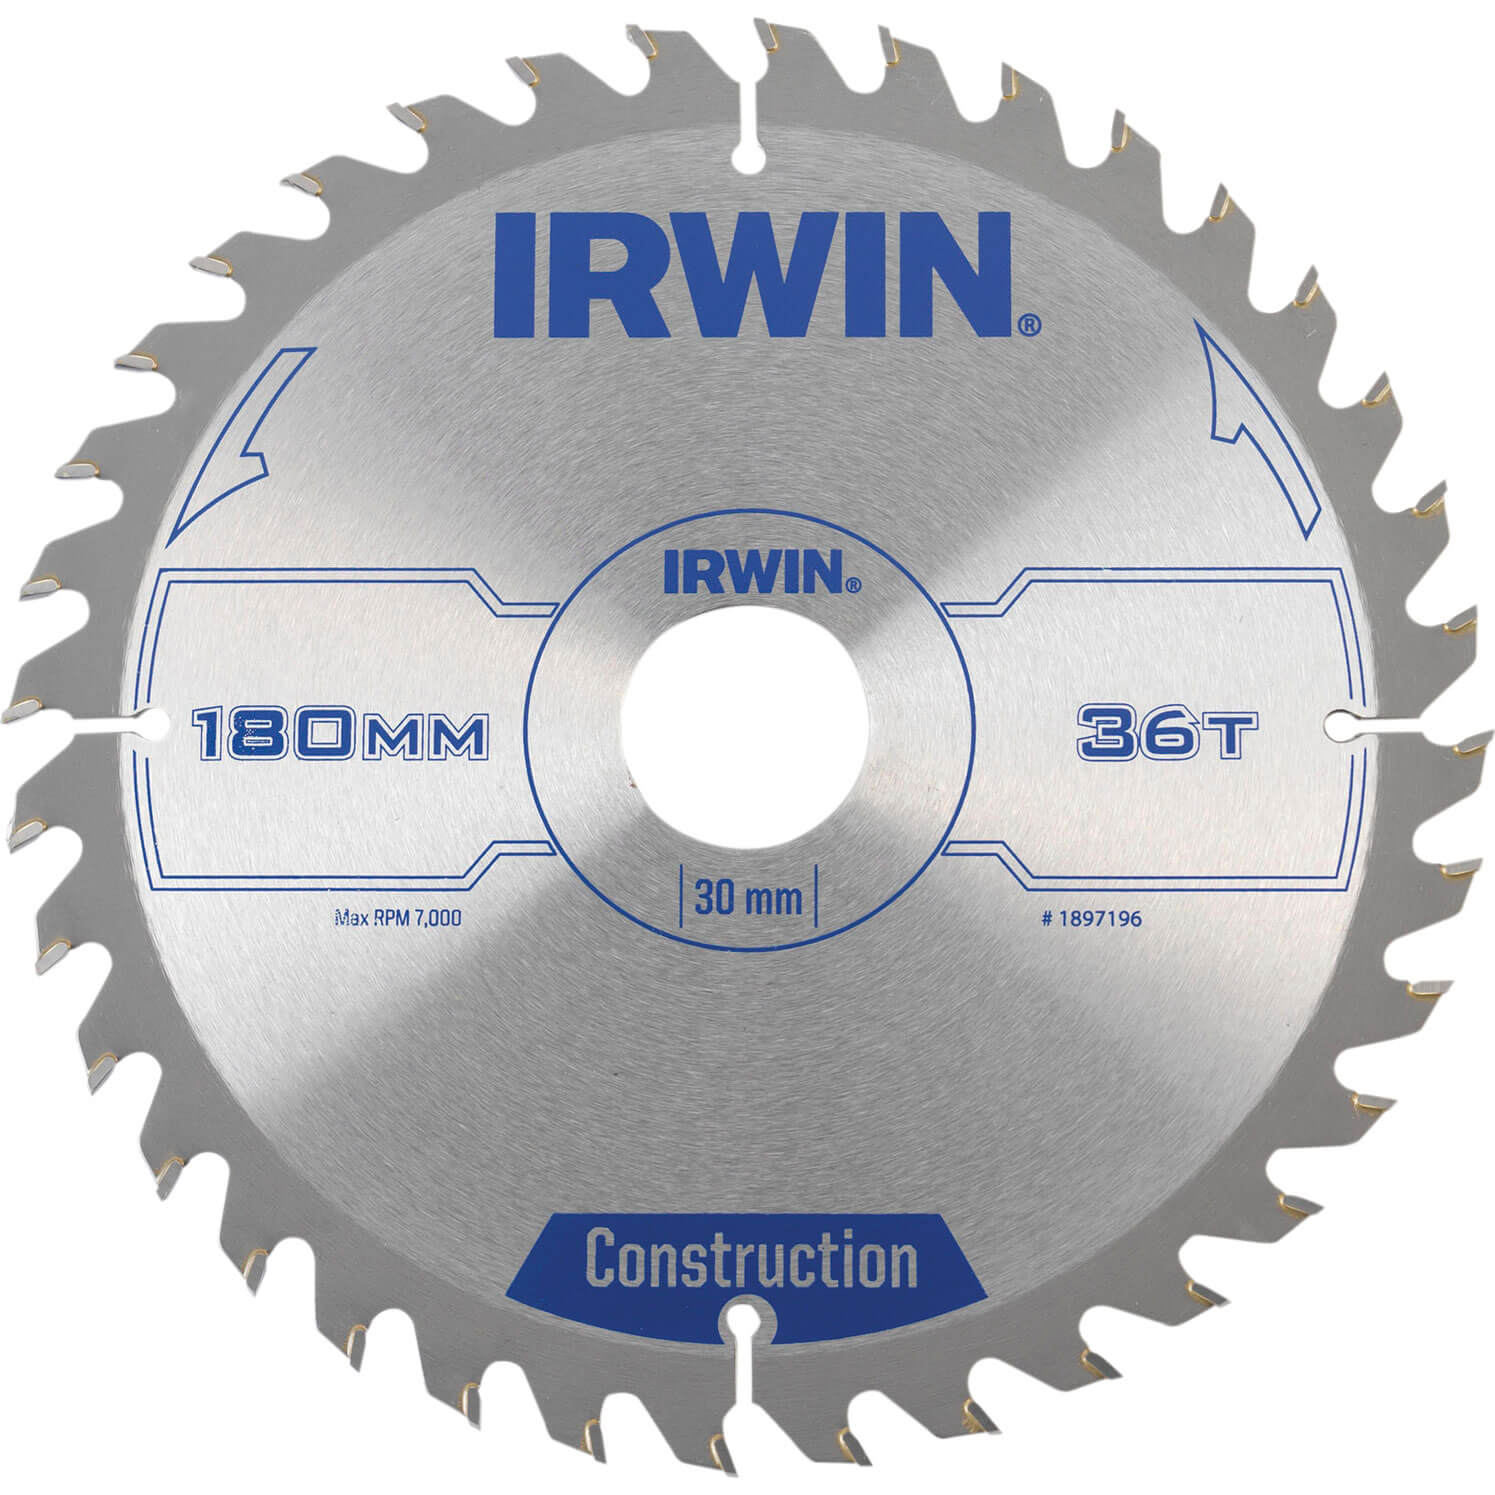 Photo of Irwin Atb Construction Circular Saw Blade 180mm 36t 30mm